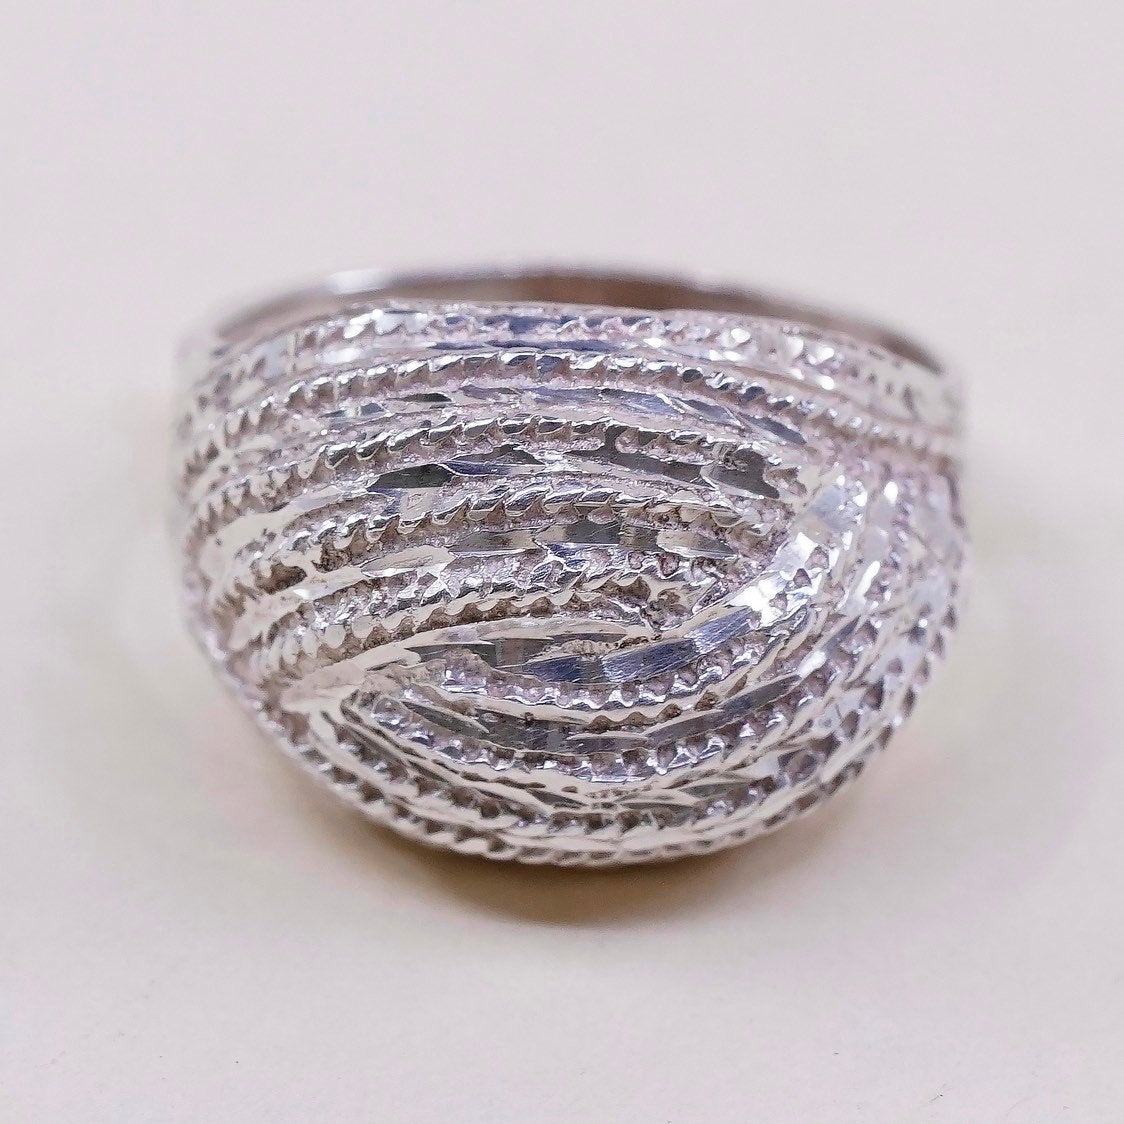 Size 9, vtg sterling silver handmade entwined ring, 925 cocktail band